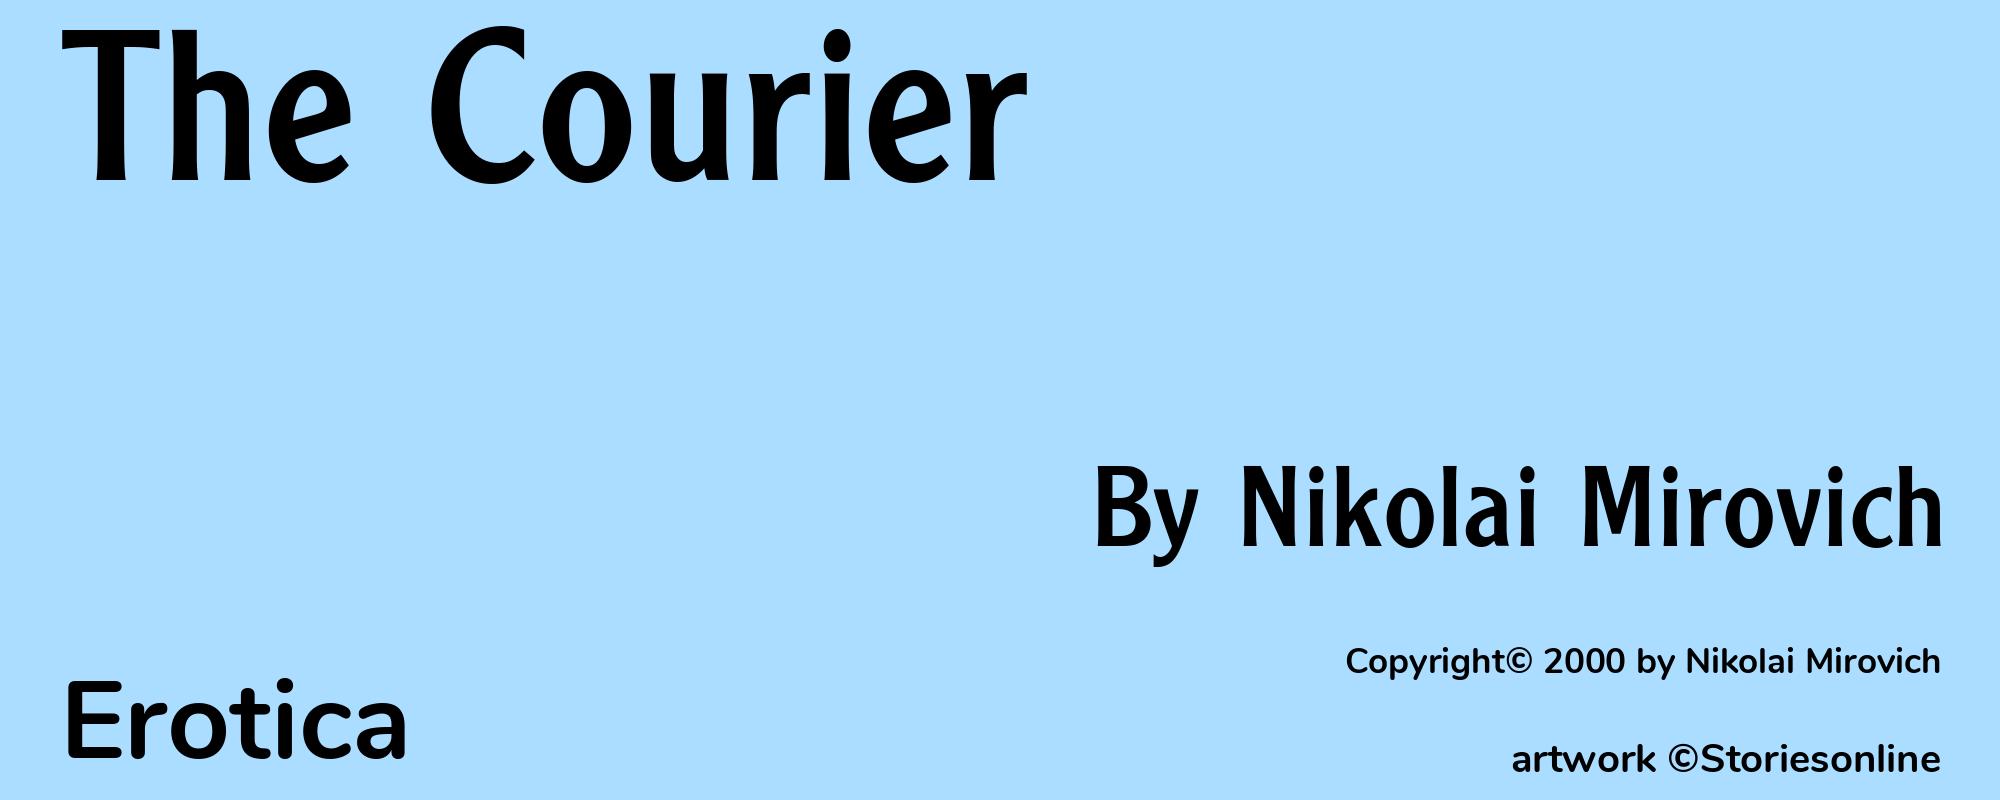 The Courier - Cover